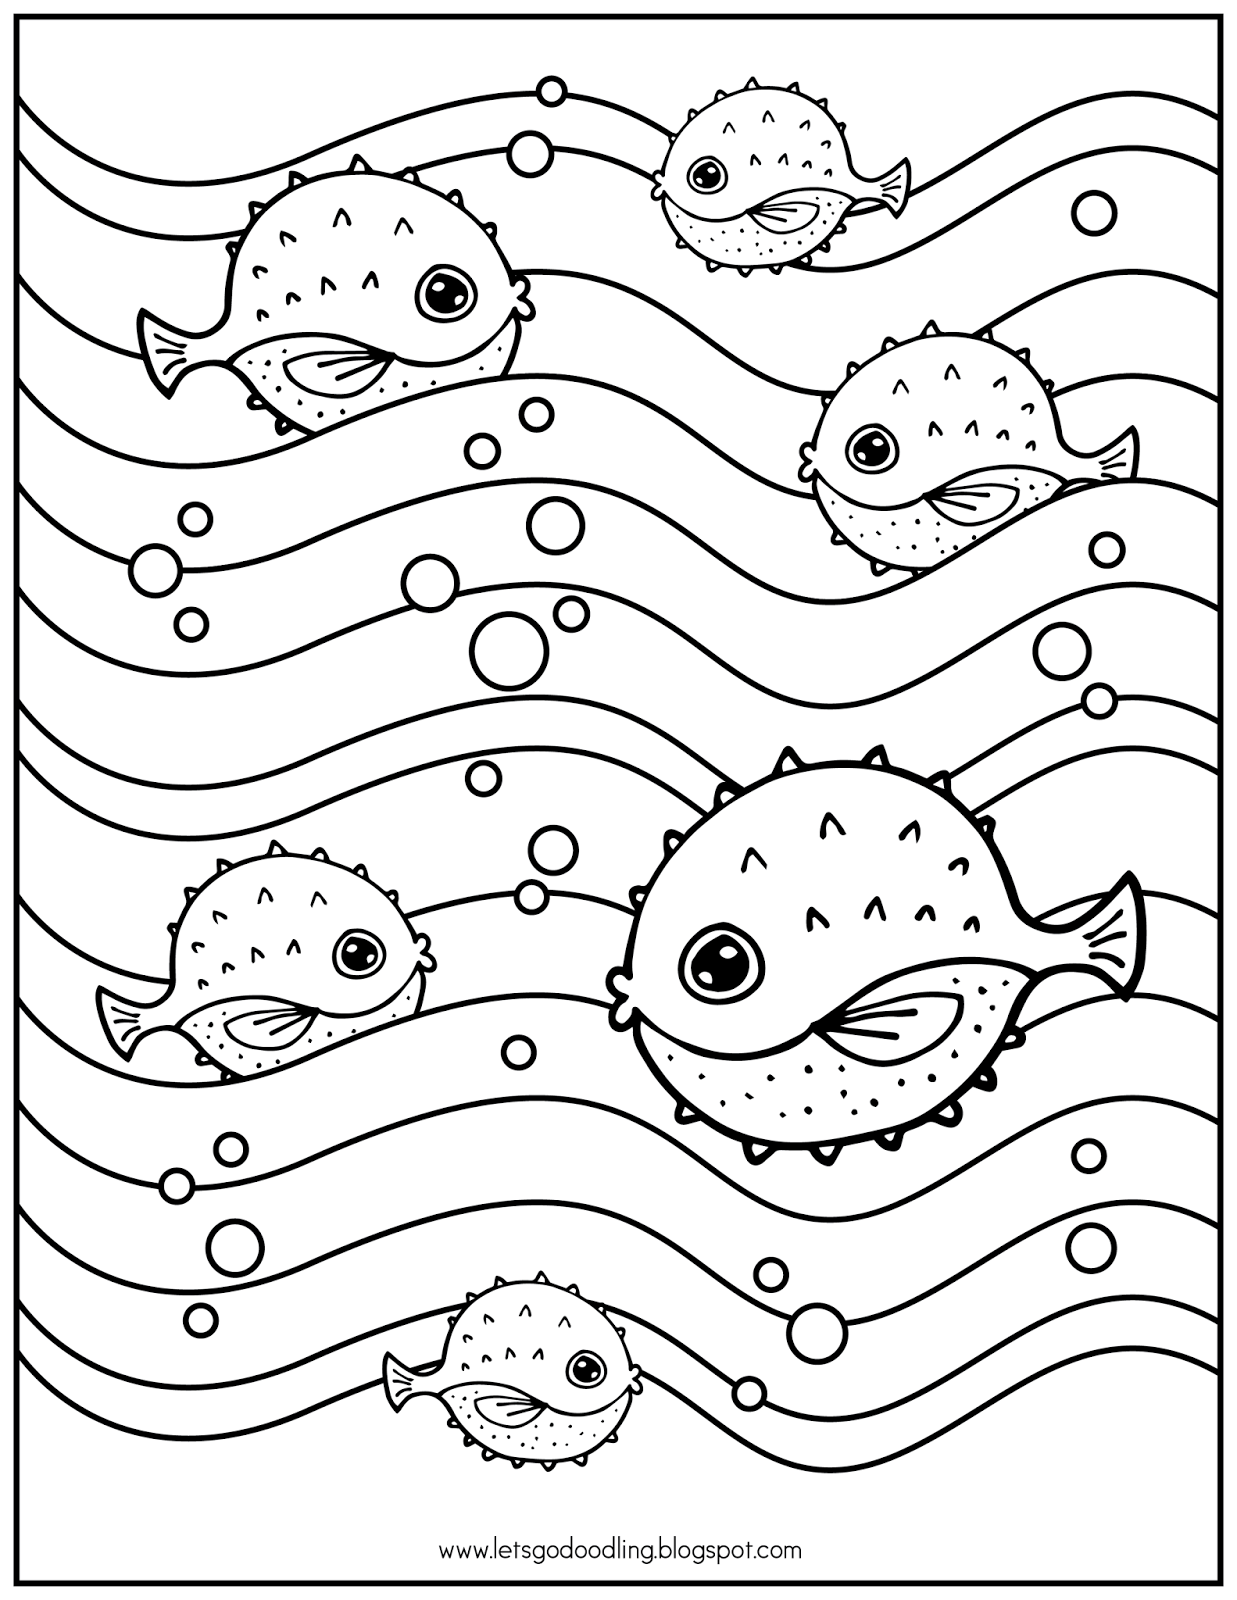 FREE Printable Coloring Page: Puffer Fish